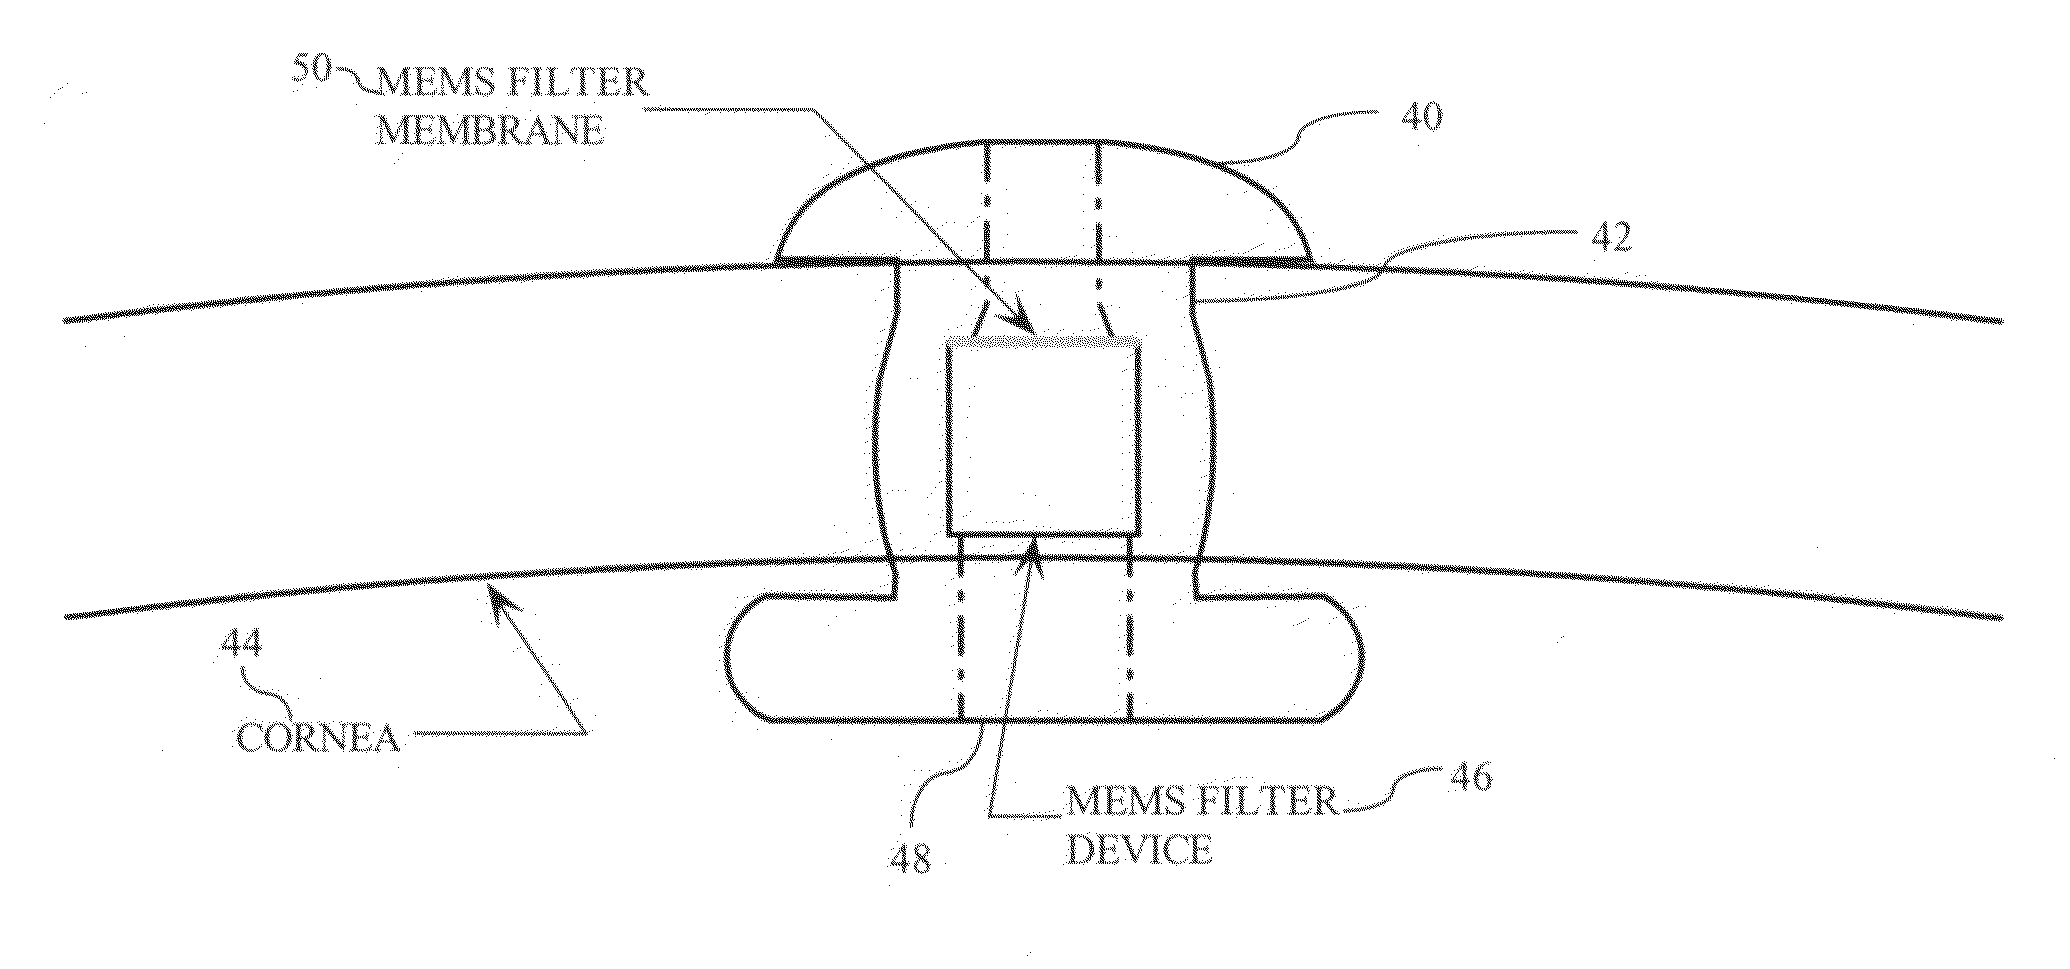 Micromachined membrane filter device for a glaucoma implant and method for making the same